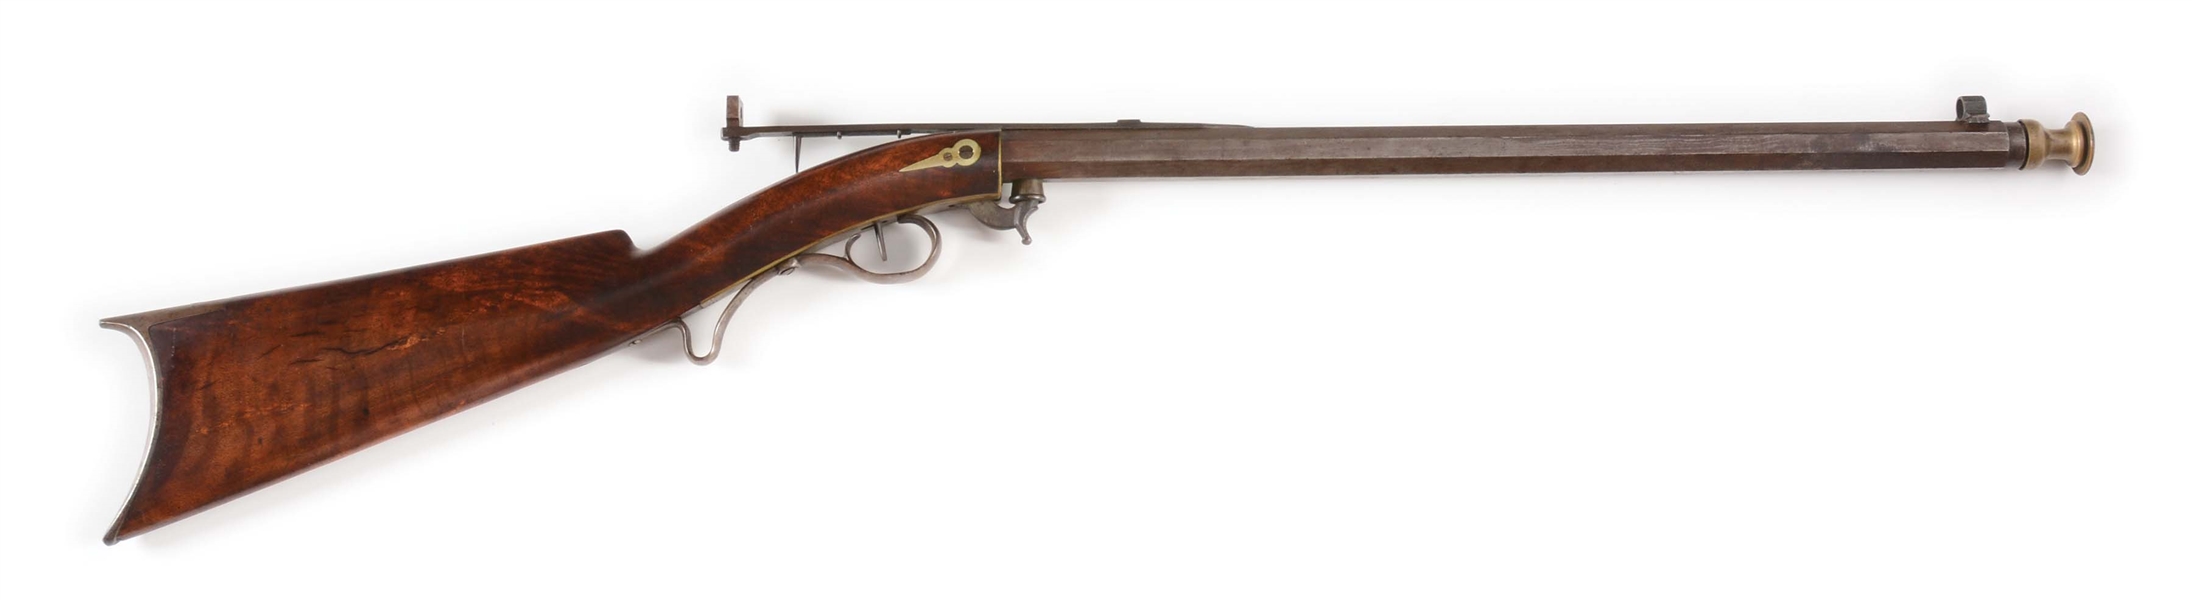 (A) MID-19TH CENTURY UNDER-HAMMER PERCUSSION BUGGY RIFLE BY TRYON.